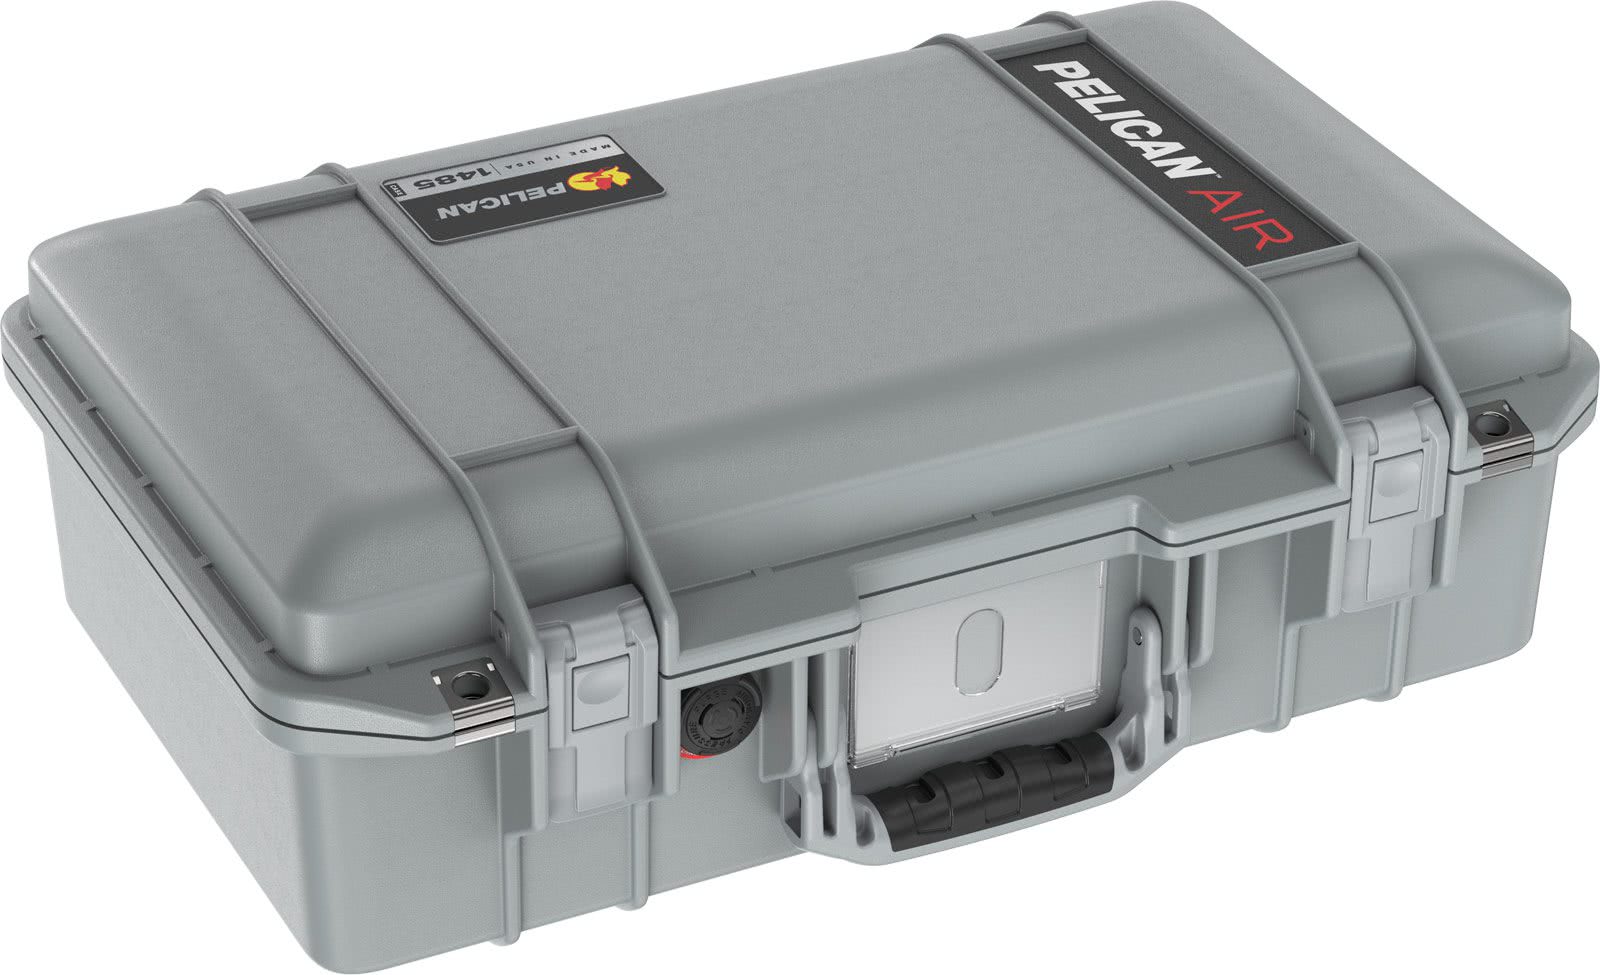 Pelican Products 1485 Air Case - Bags & Packs